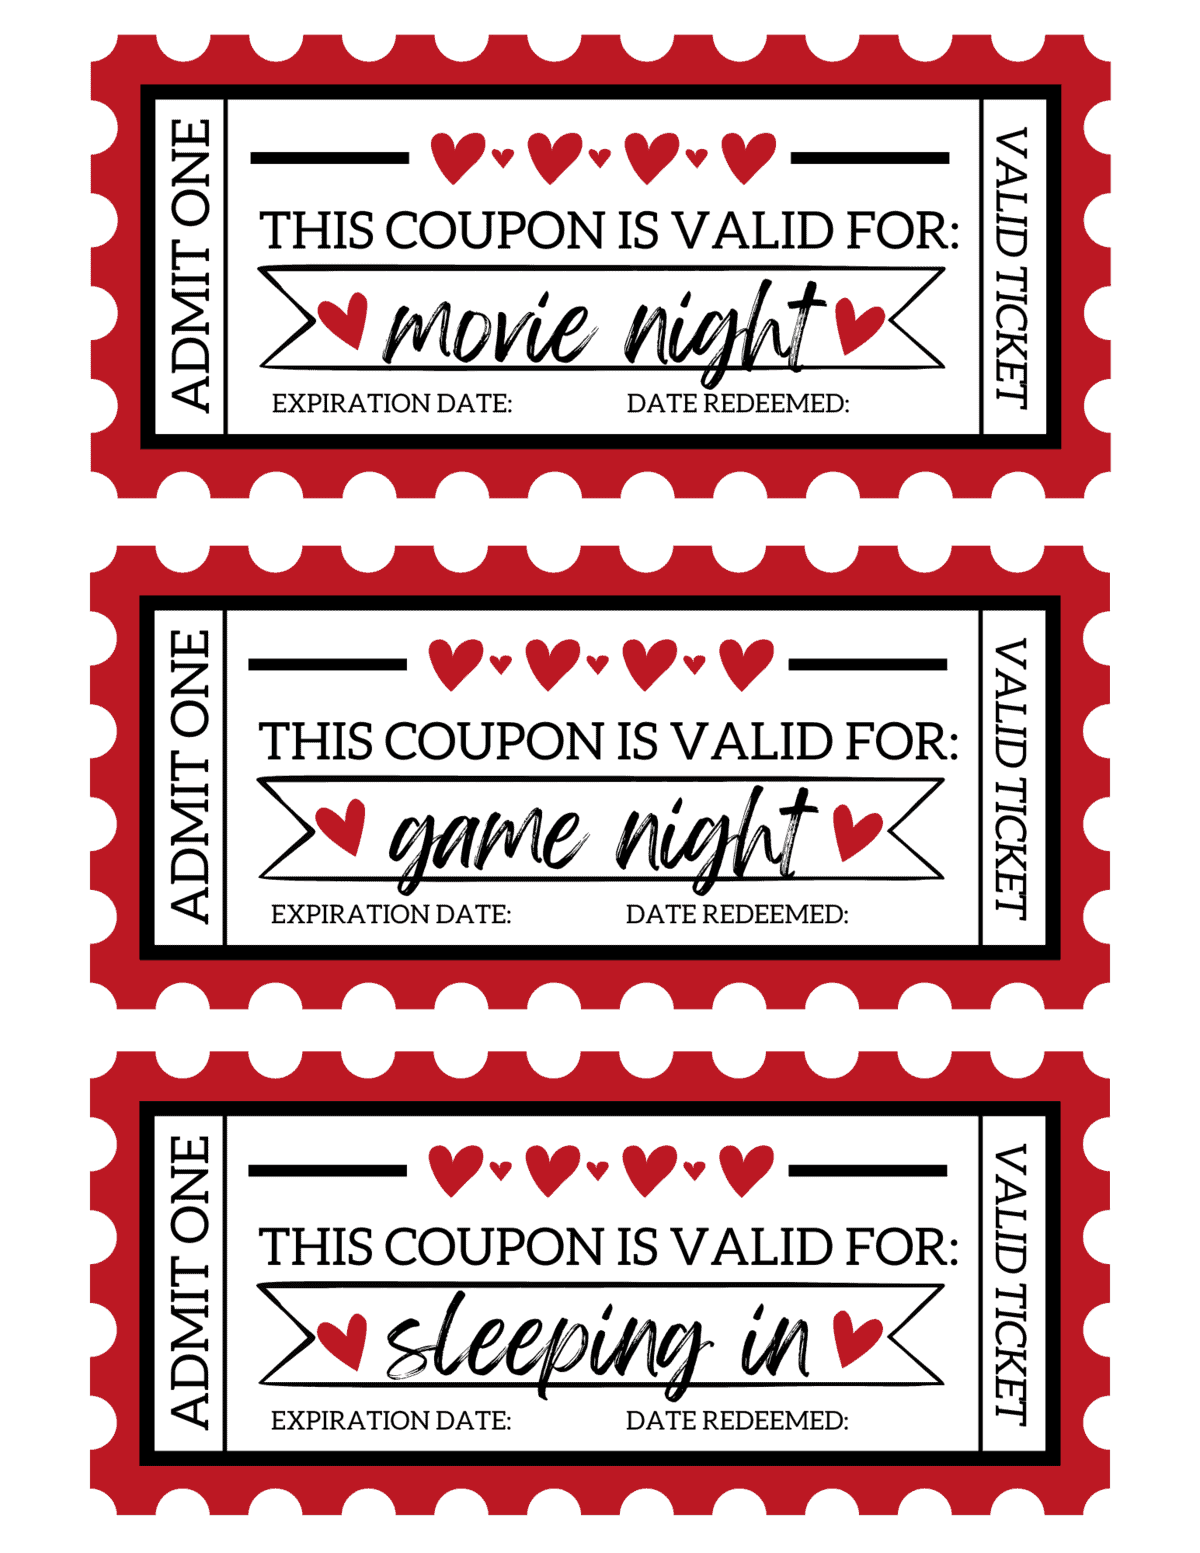 3 Valentine's Day coupons